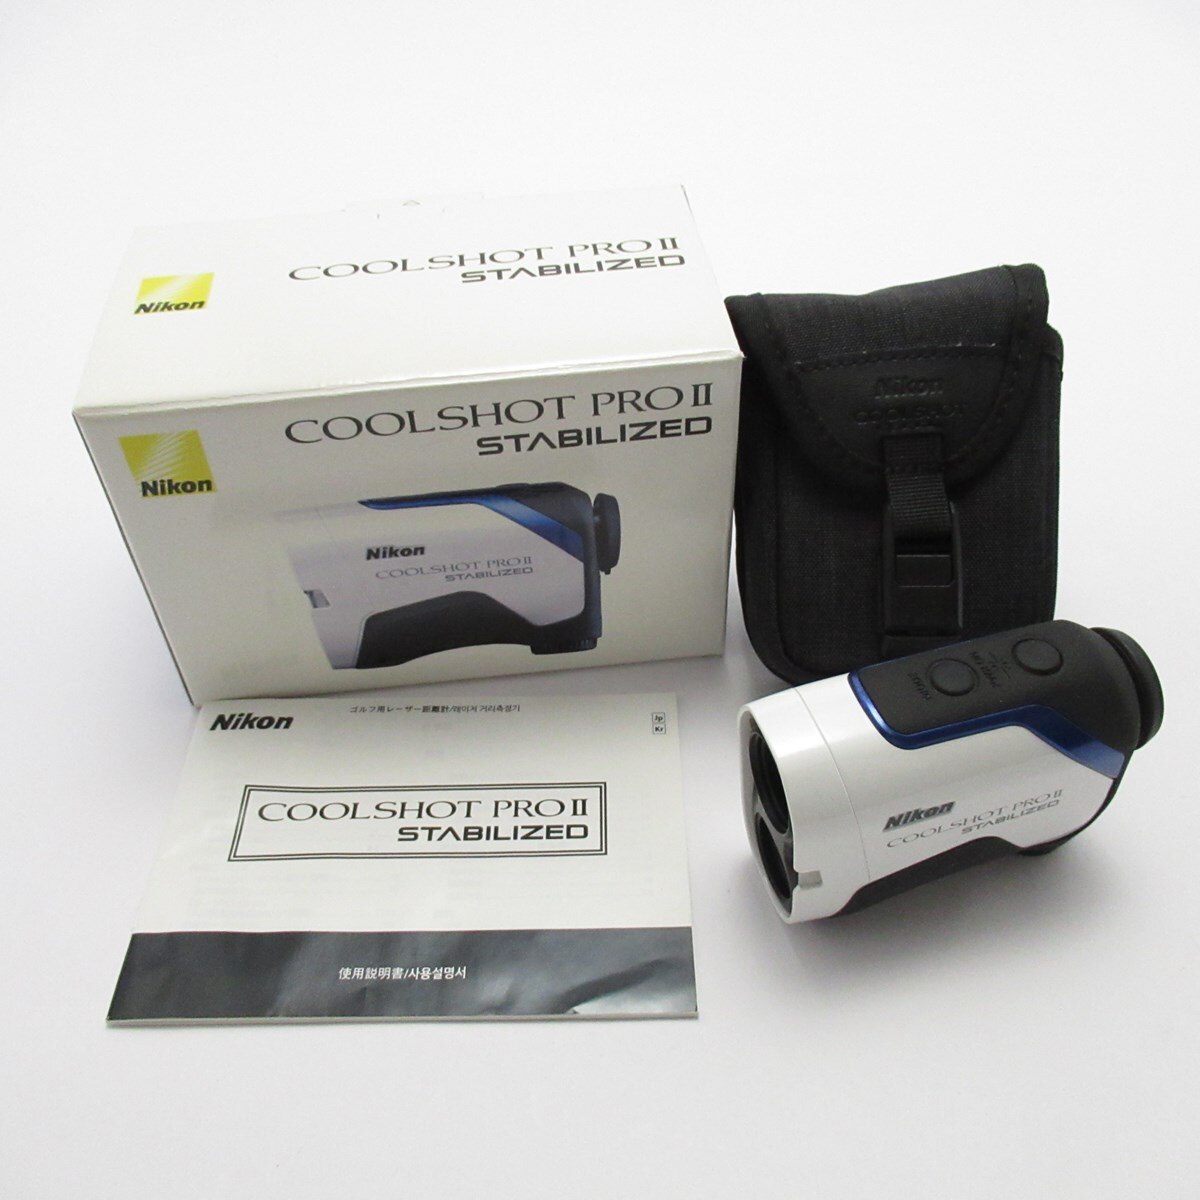 COOLSHOT PRO II STABILIZED 中古その他 ニコン メンズ 通販｜GDO中古 